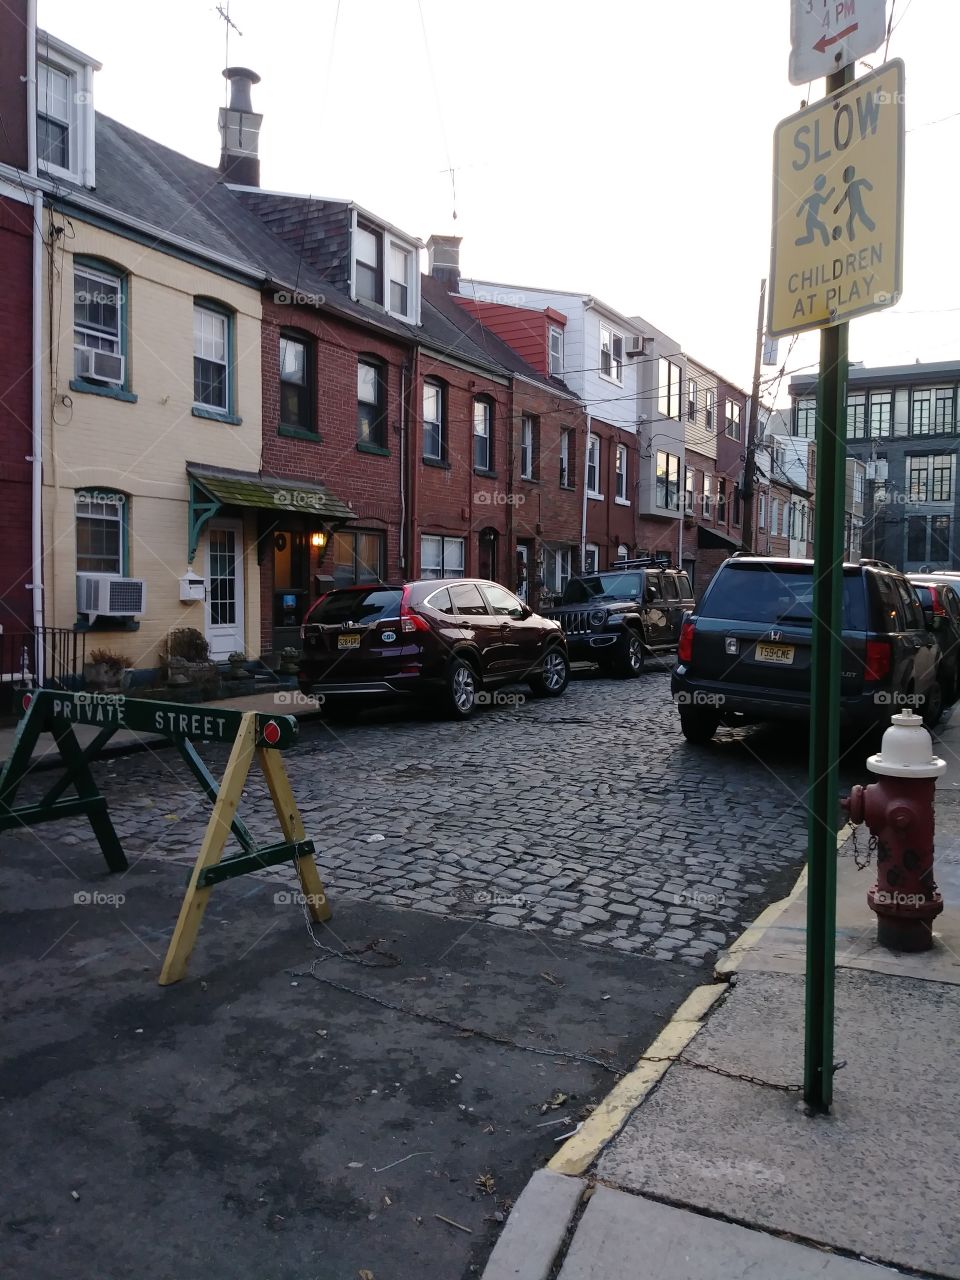 Urban remnants of the 19th century at dusk. Small row houses in Hoboken New Jersey on private cobblestone street.